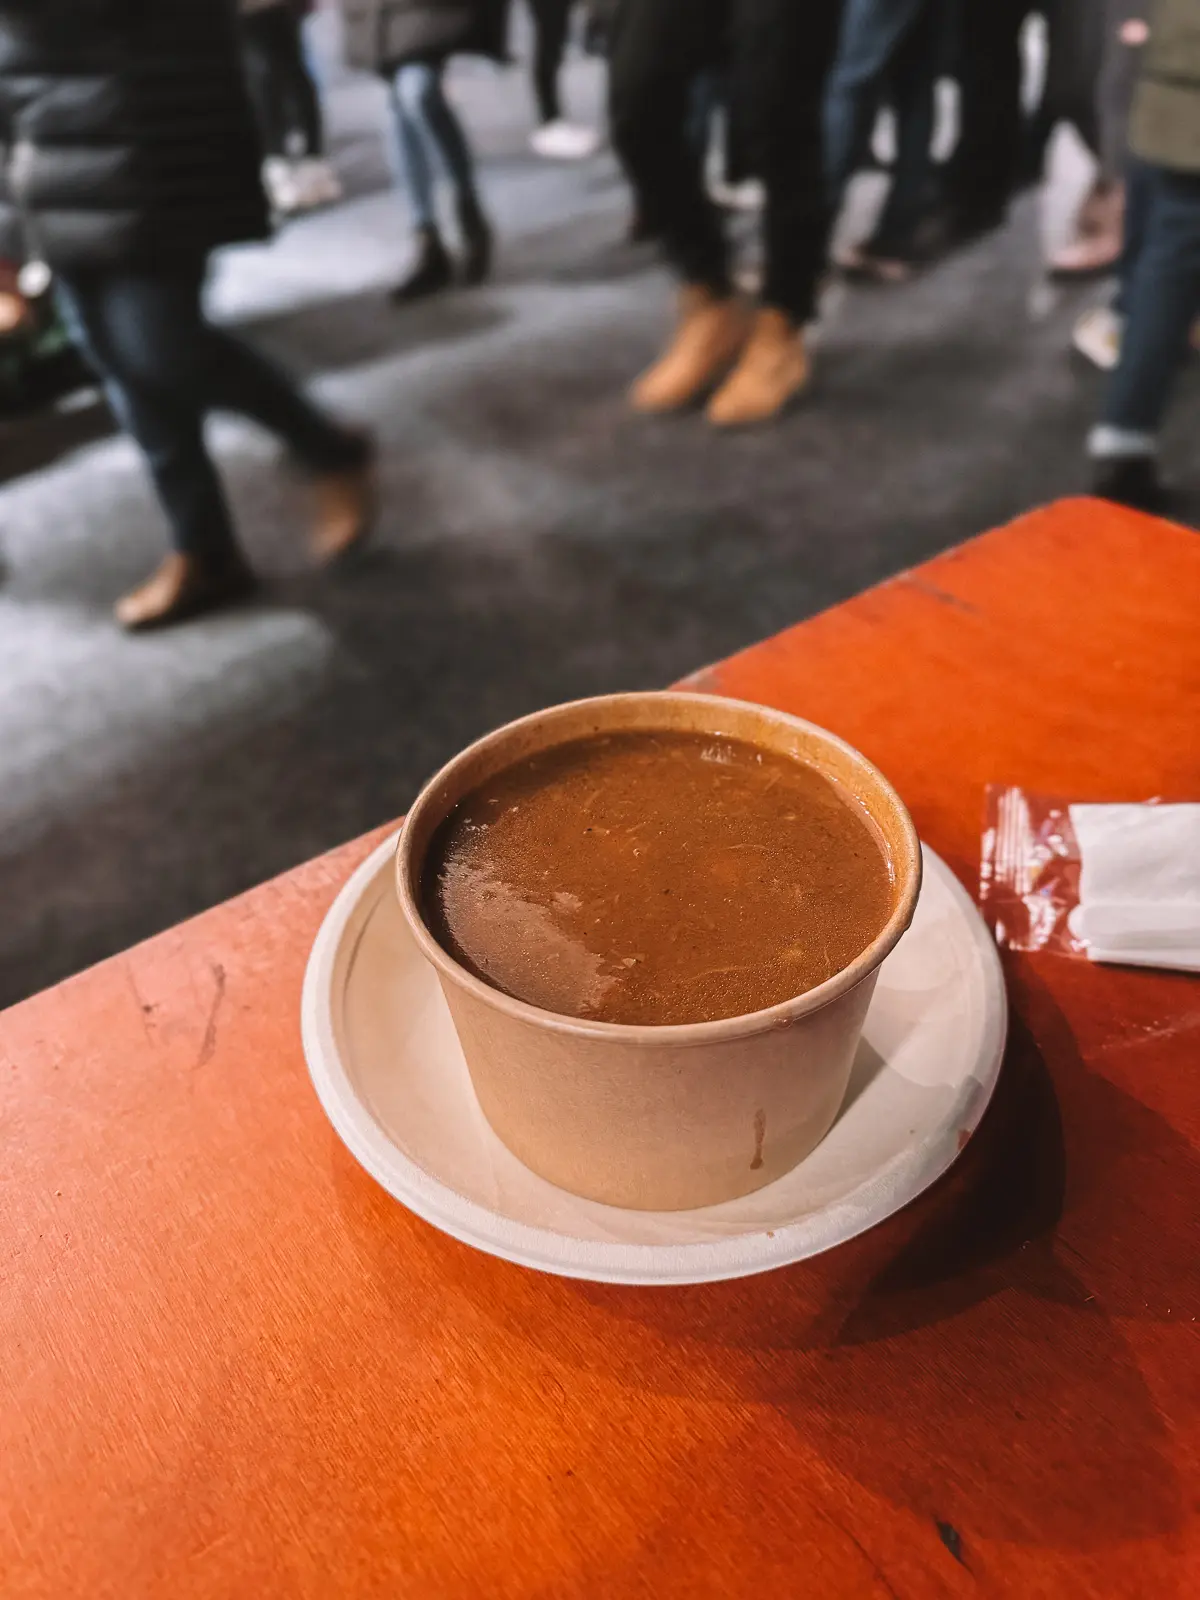 Goulash soup in a paper cup on an orange table, best street food in Budapest.